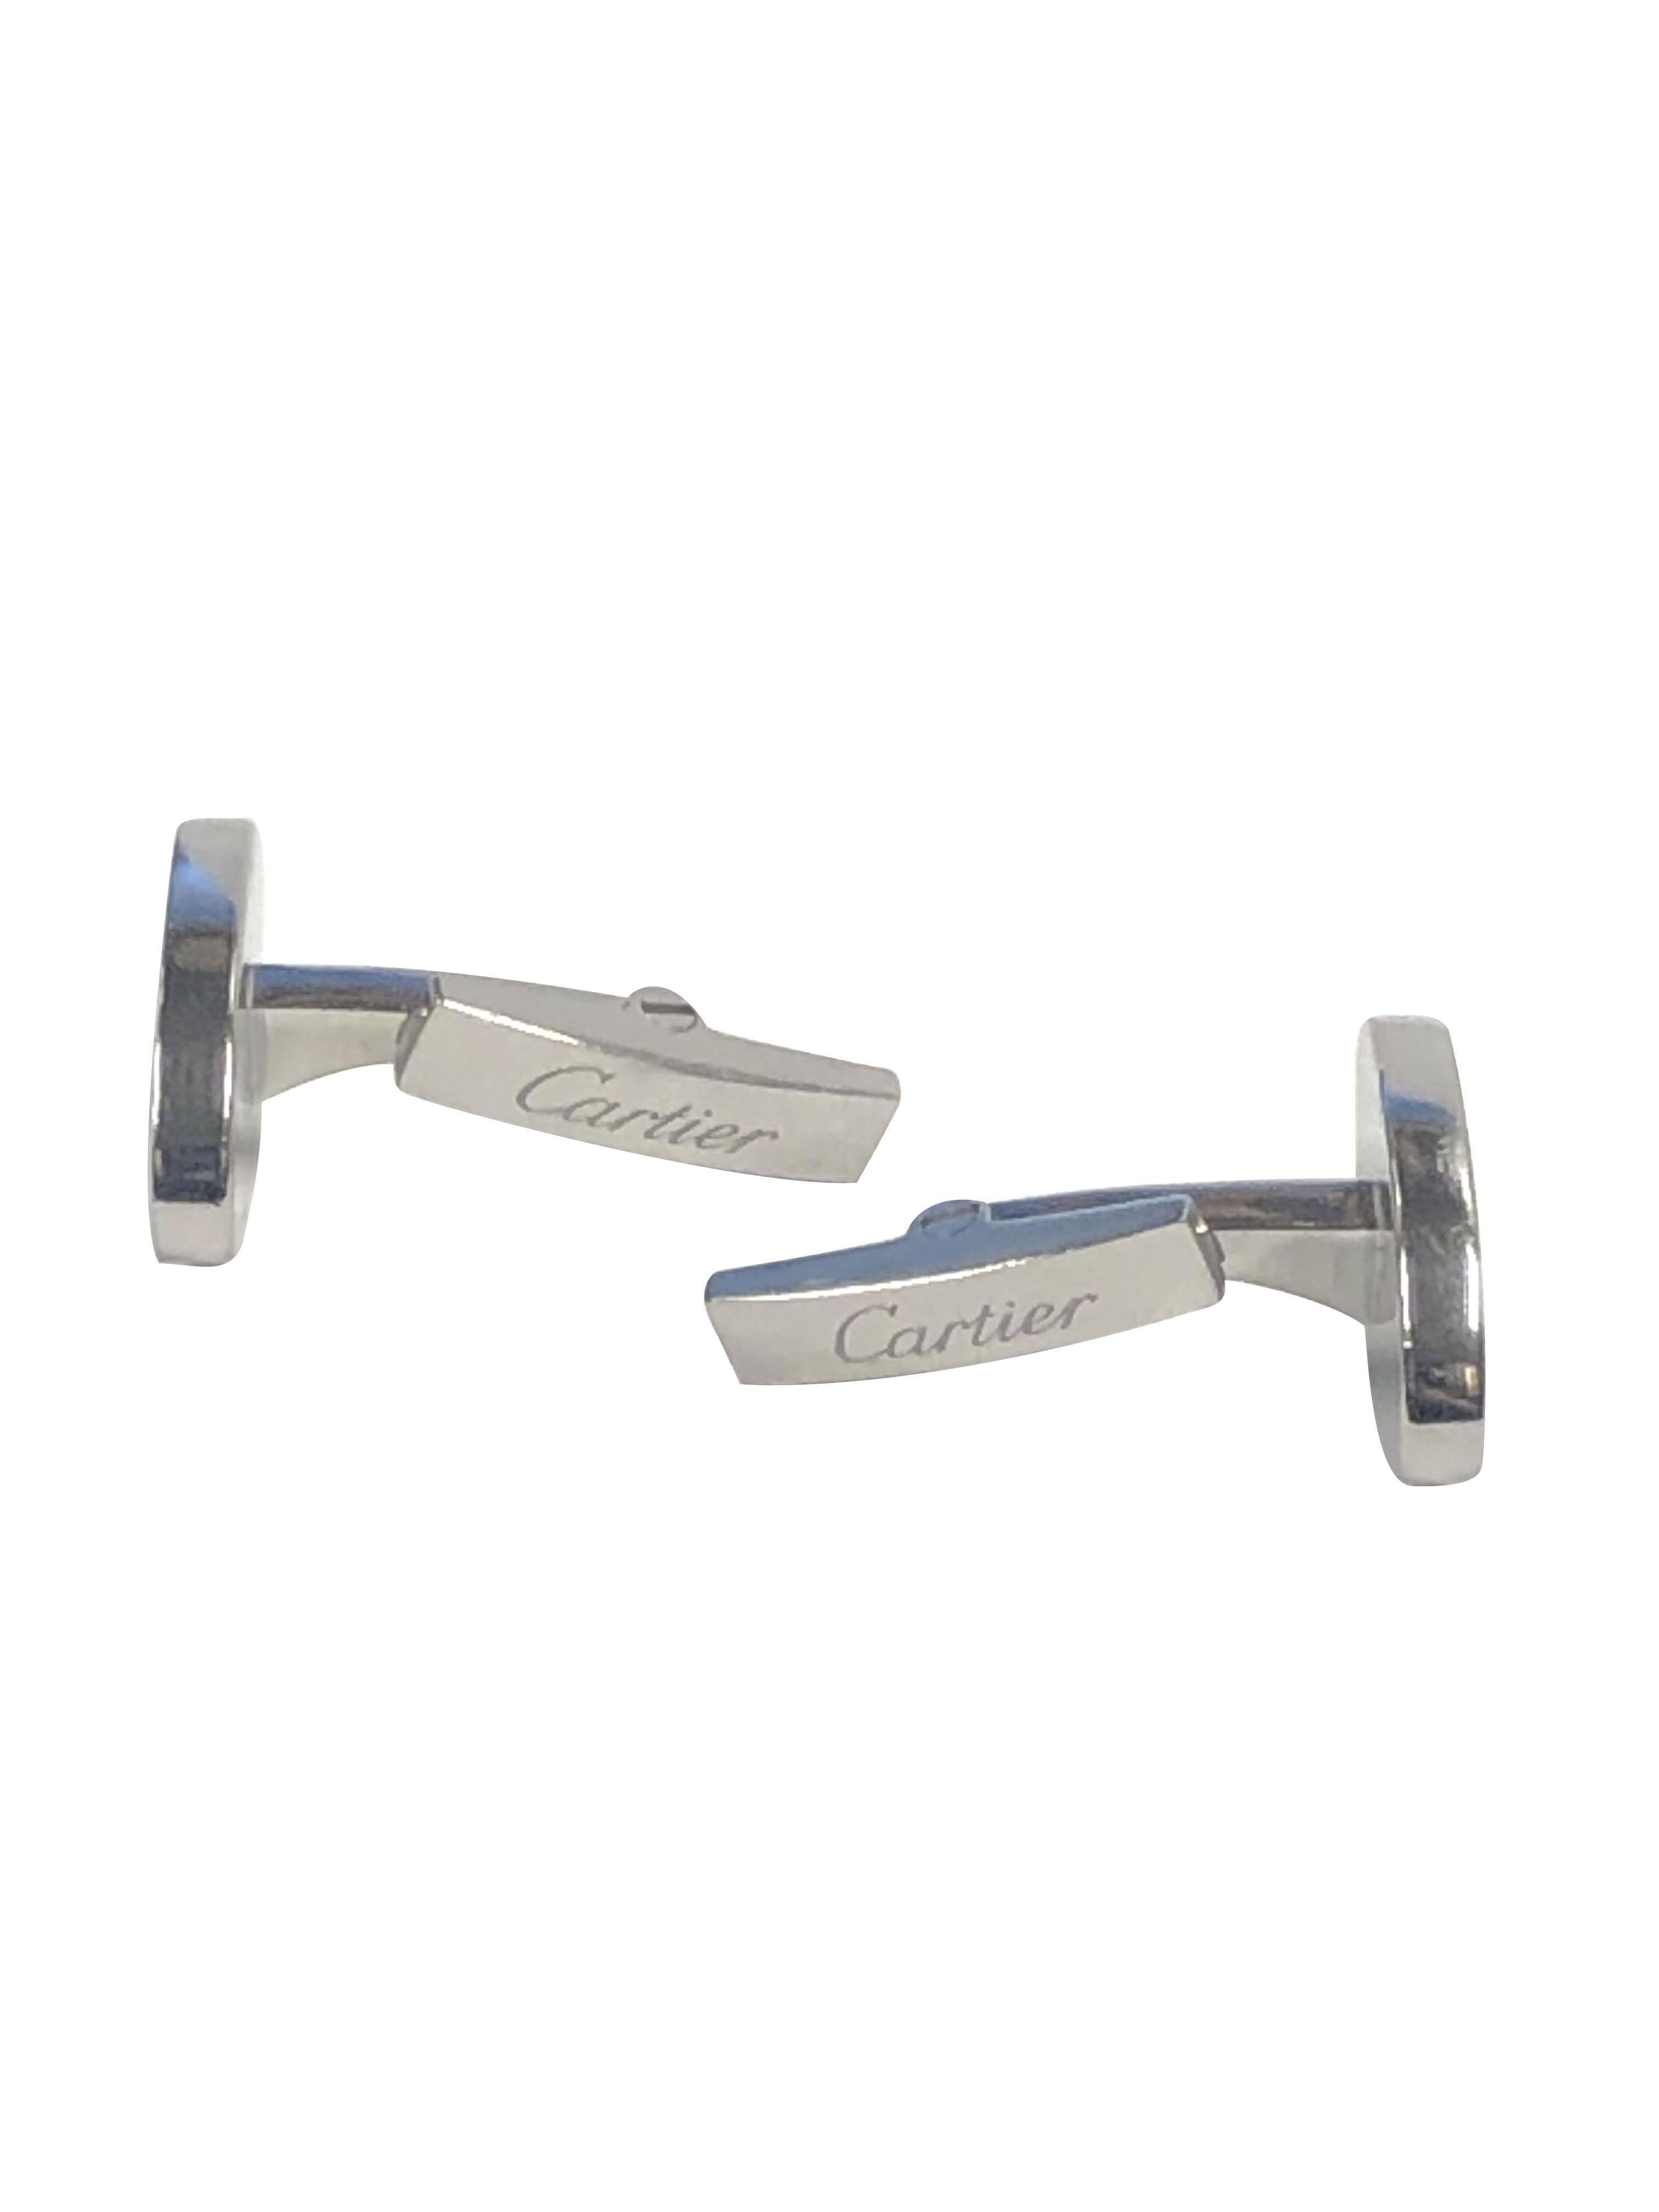 Circa 2015 Cartier C logo Sterling Silver Cufflinks, the oval tops measure 3/4 X 3/8 inch, finished in Black enamel and have the double C logo in the center. Toggle backs for easy on and off. Come in original Cartier Presentation box.  